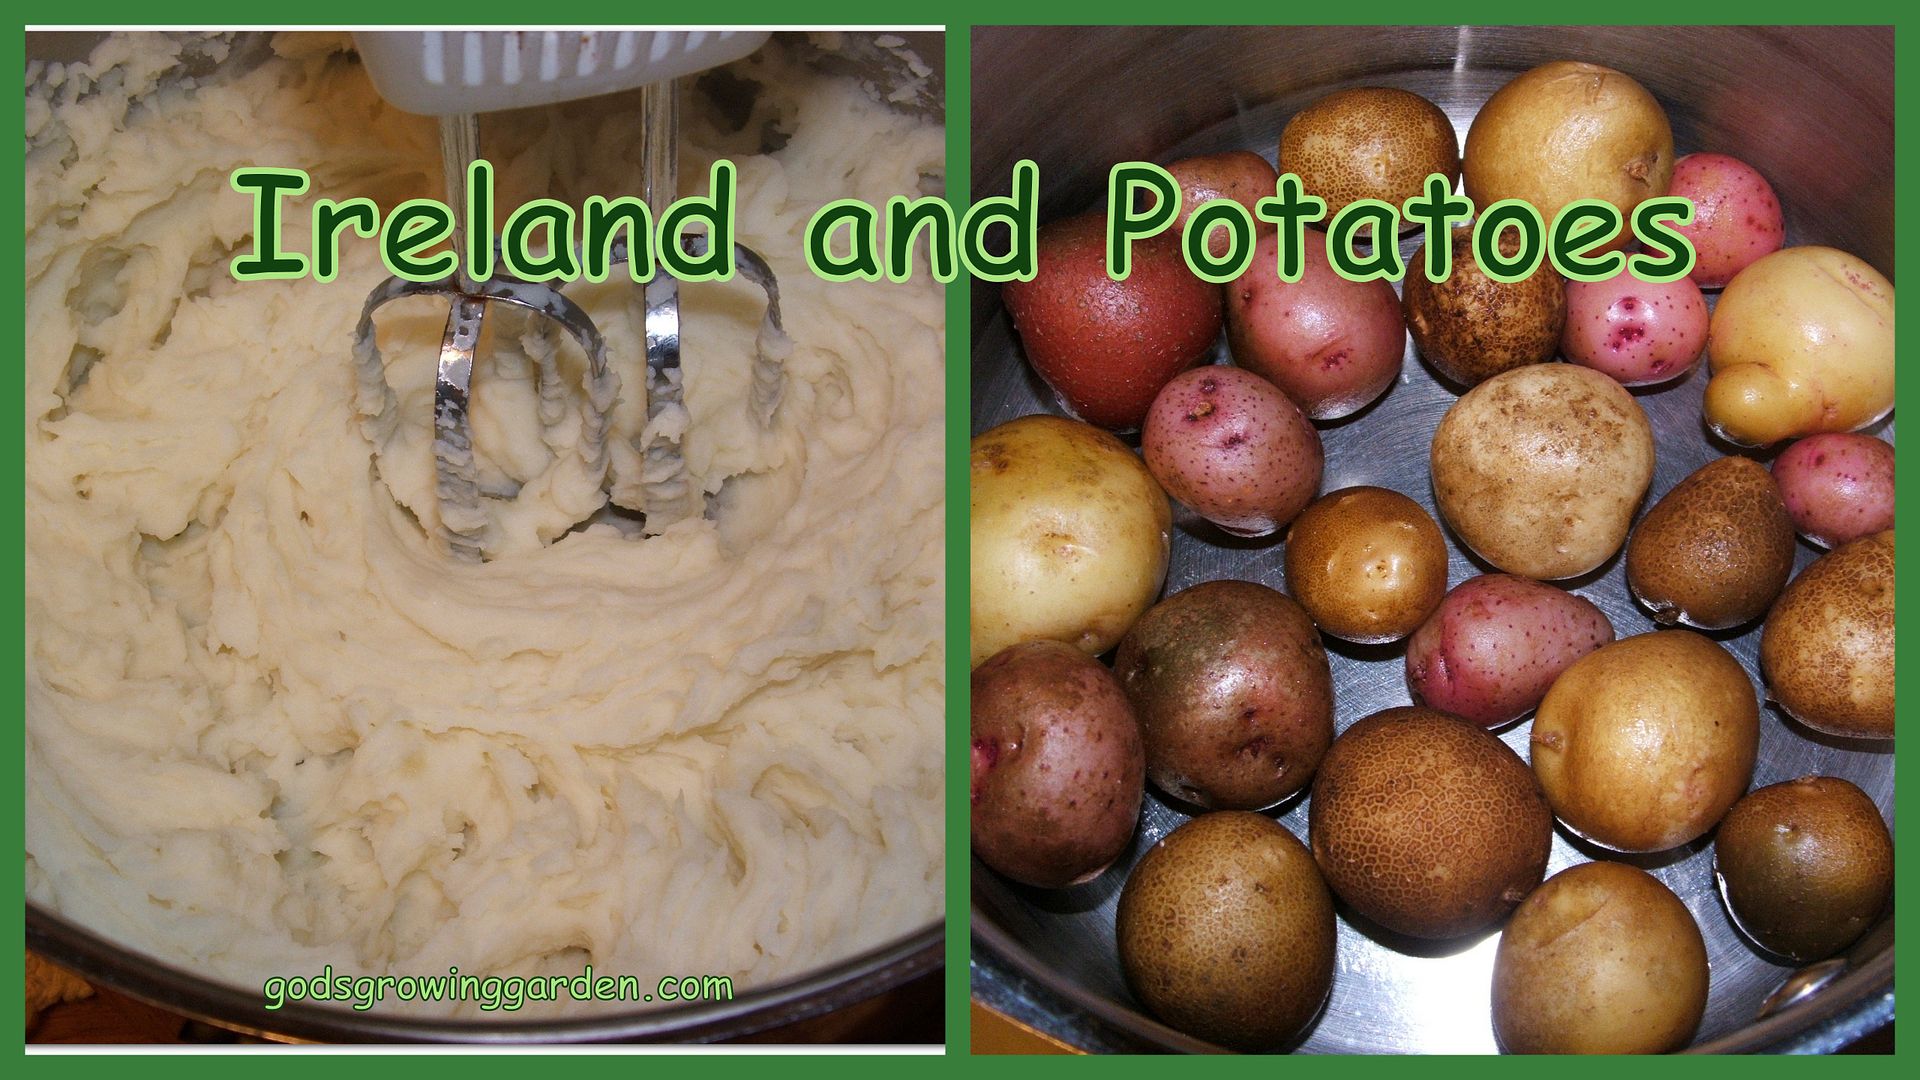 Ireland & Potatoes by Angie Ouellette-Tower for godsgrowinggarden.com photo 2013-10-13_zps707a1500.jpg